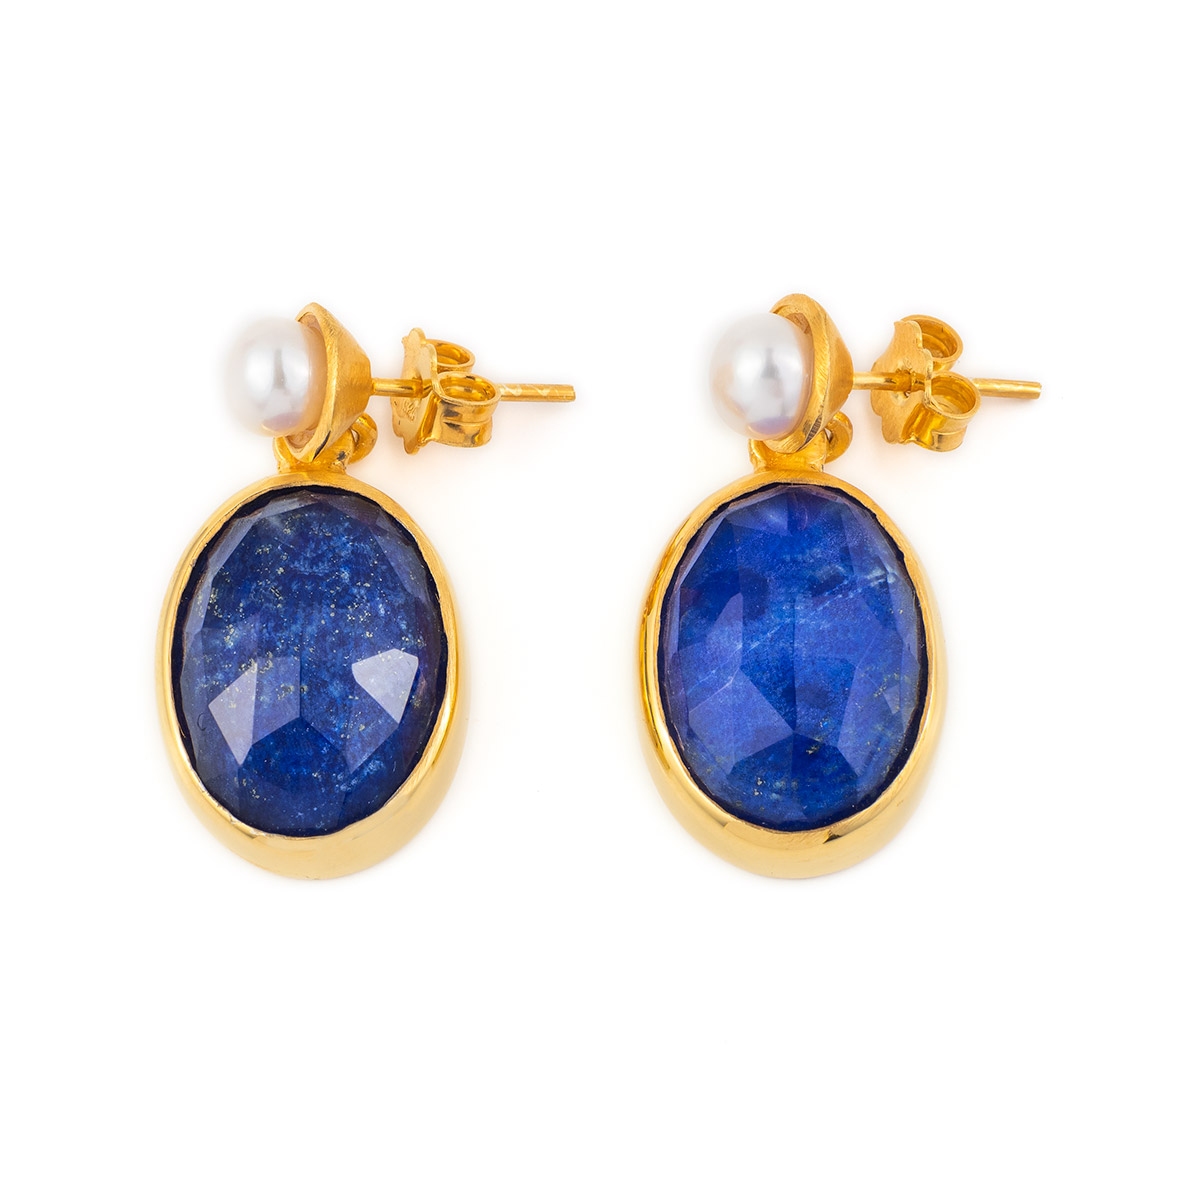 Lapis Lazuli Doublet Earrings - Sterling Silver and Gold Plated